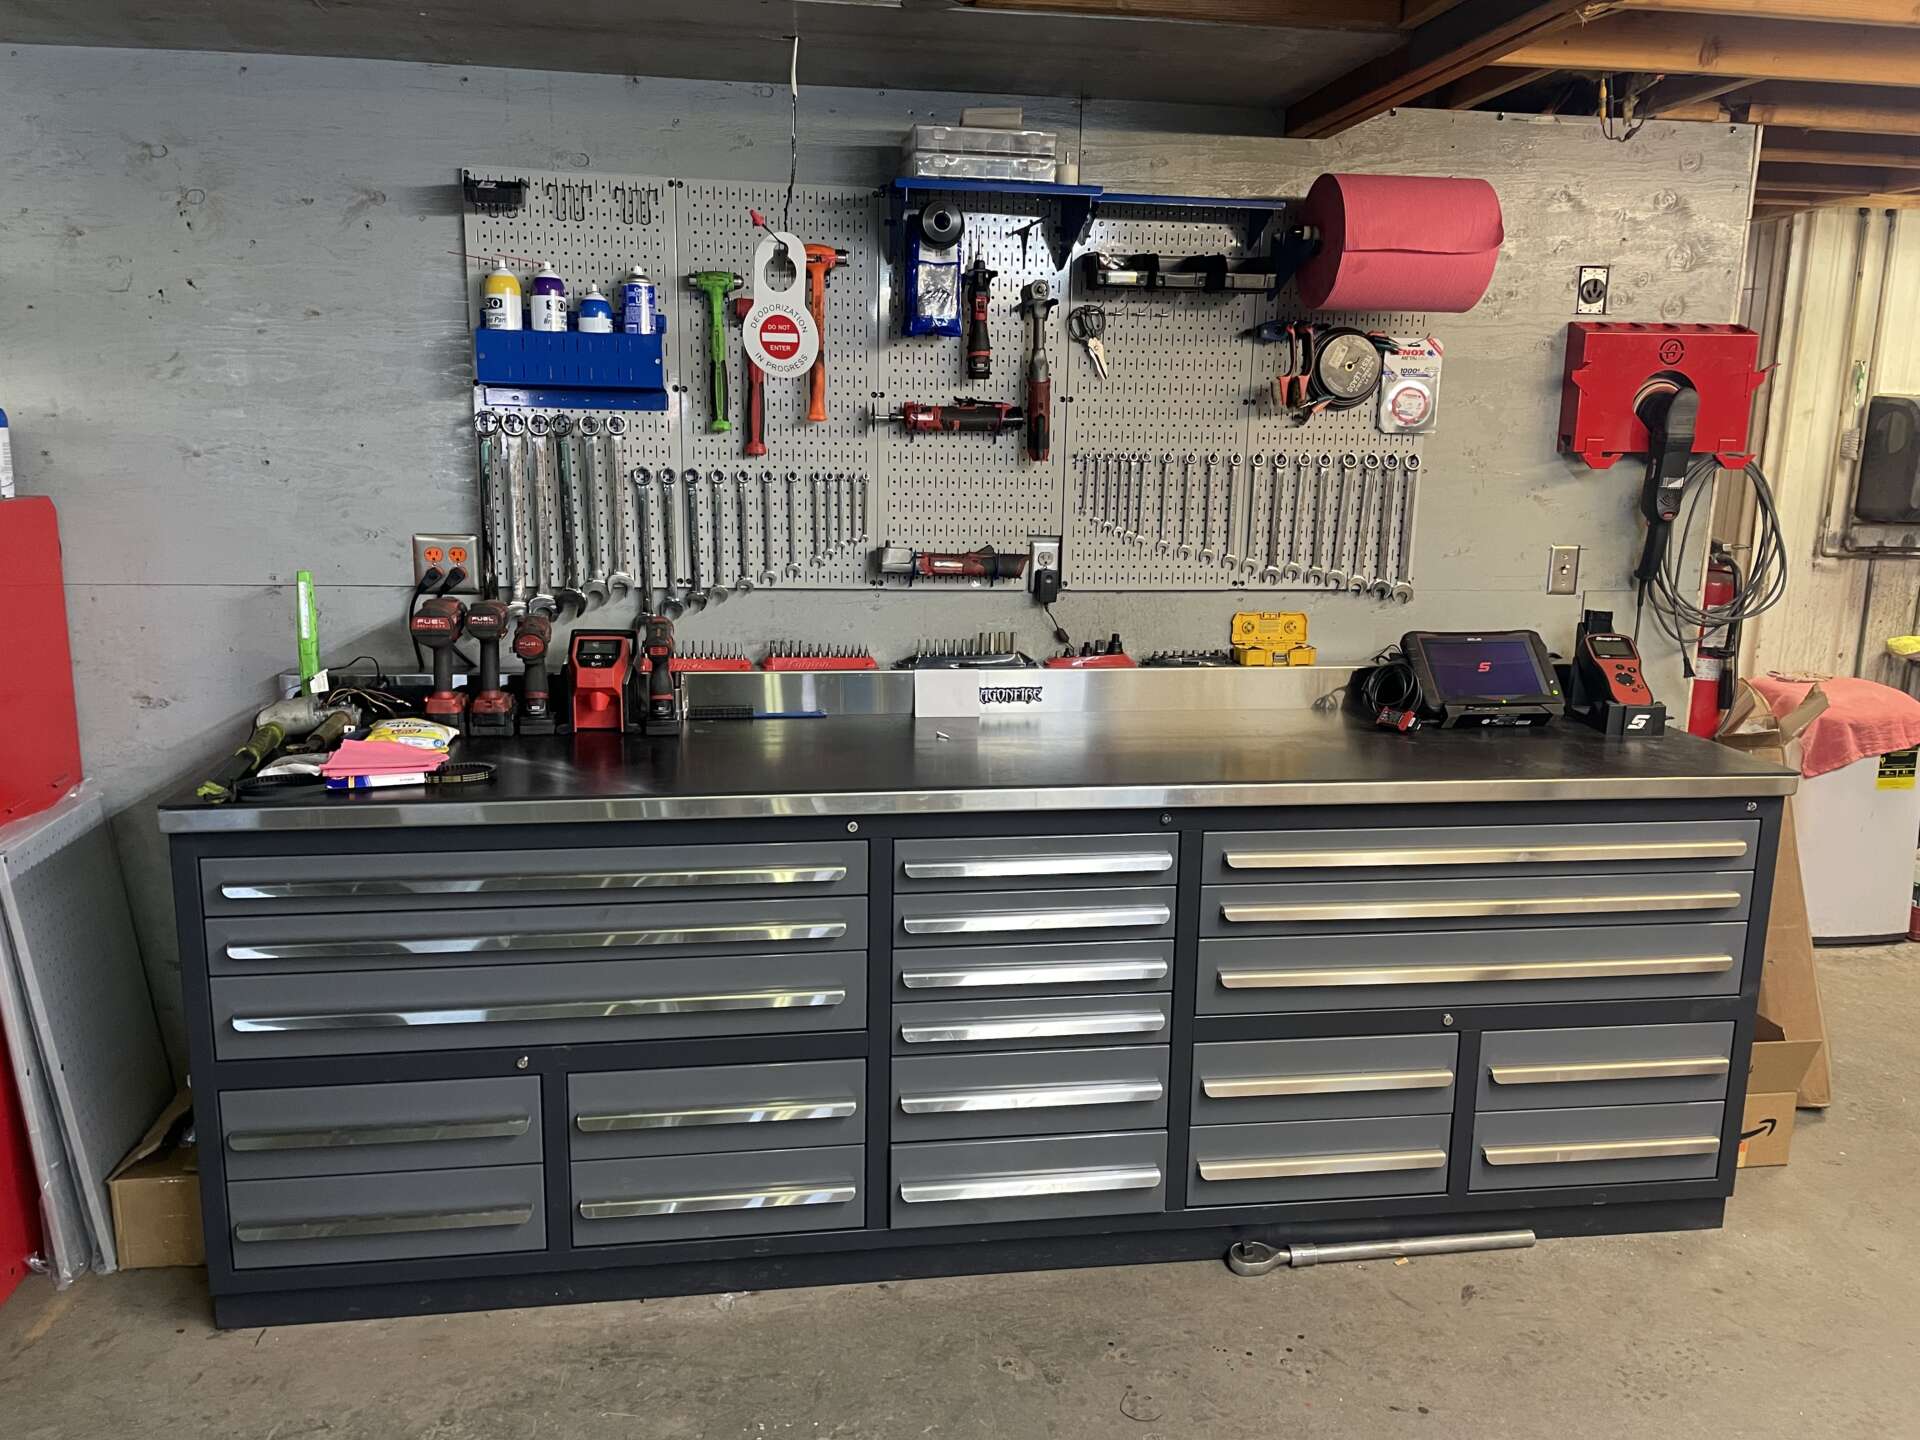 I’ve always bought Matco and Snap On tool boxes for my shop. 